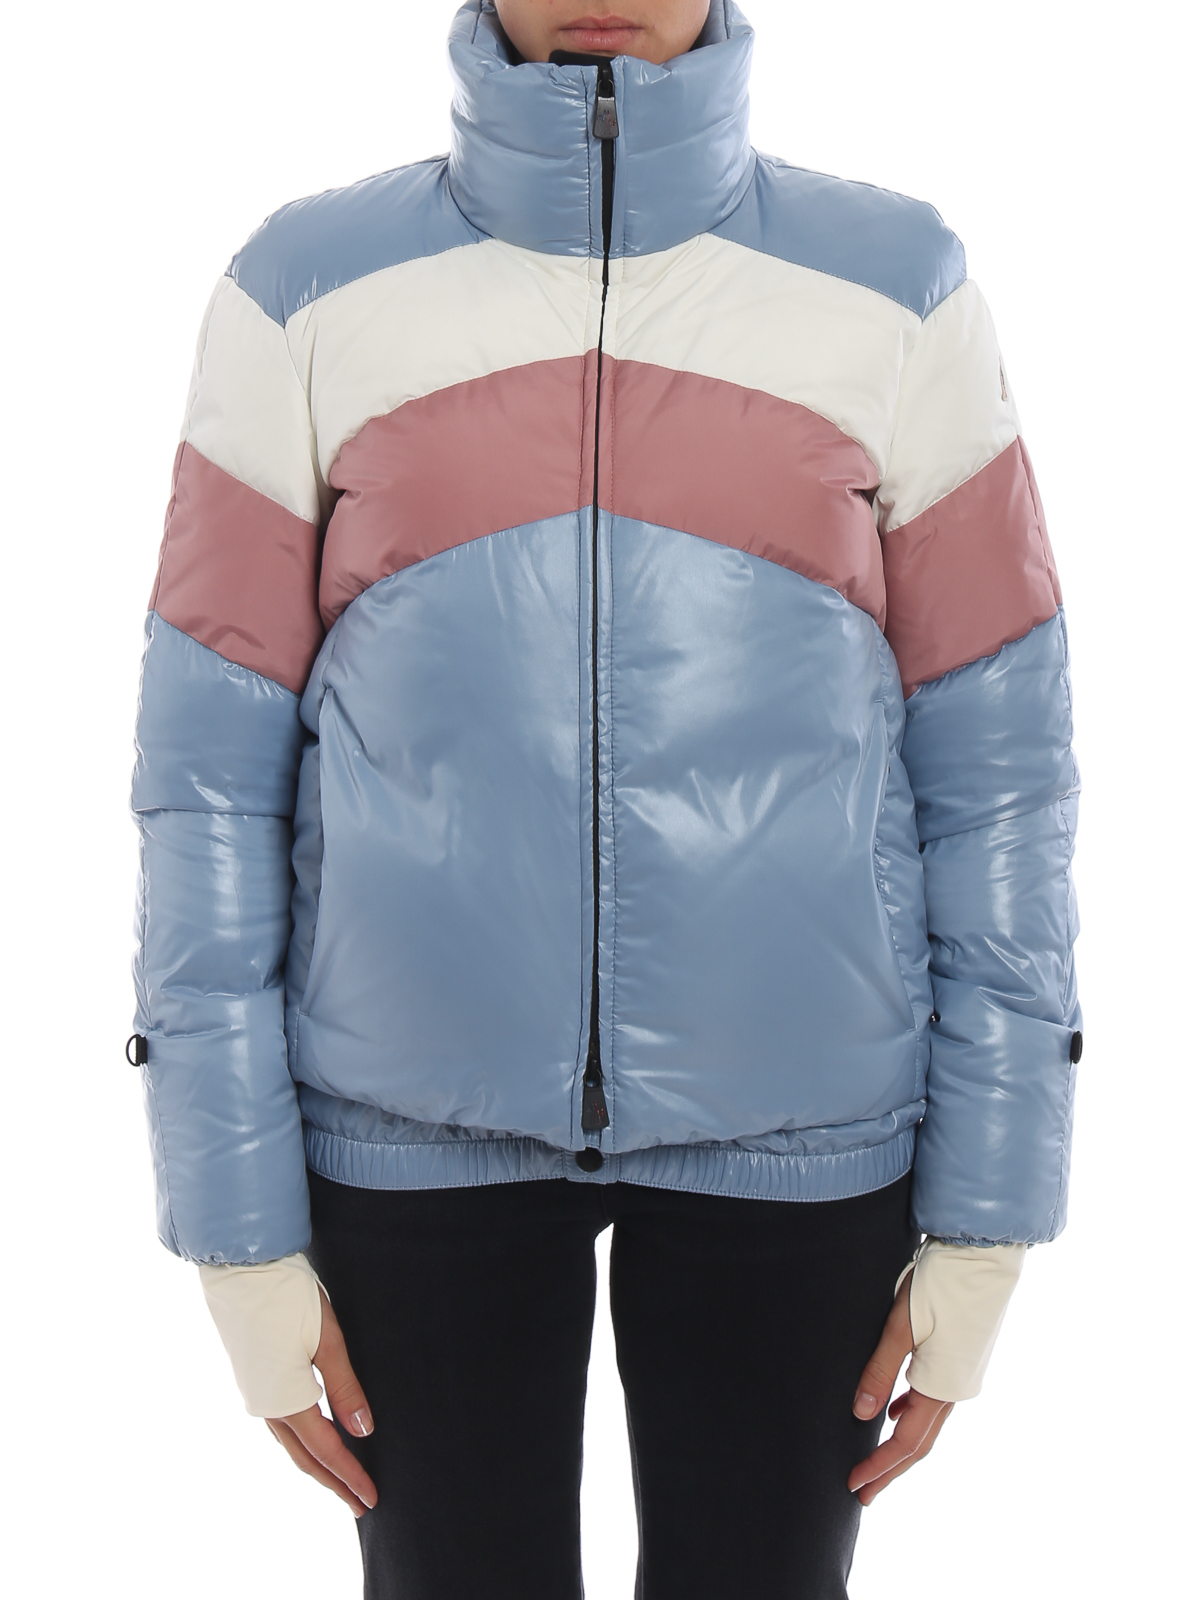 Moncler Grenoble Lamar Puffer Down Jacket Tricolor Yellow Pink White